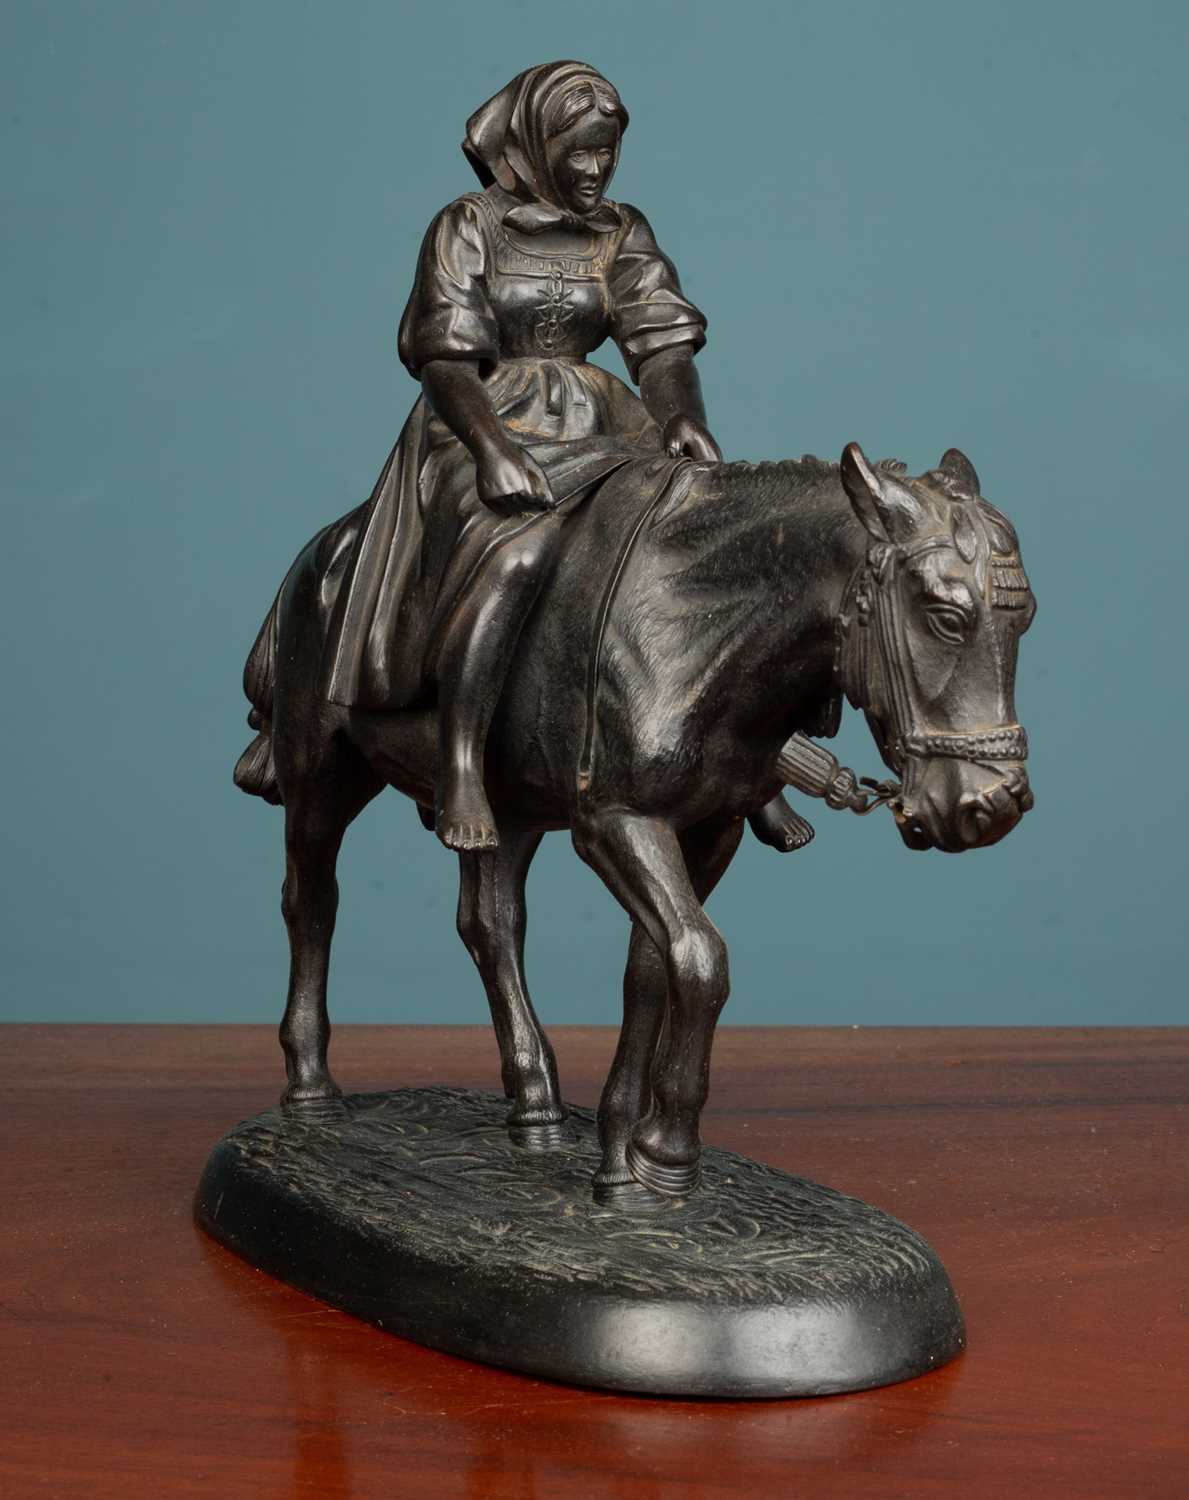 A Russian cast iron sculpture of a figure on the back of a mule